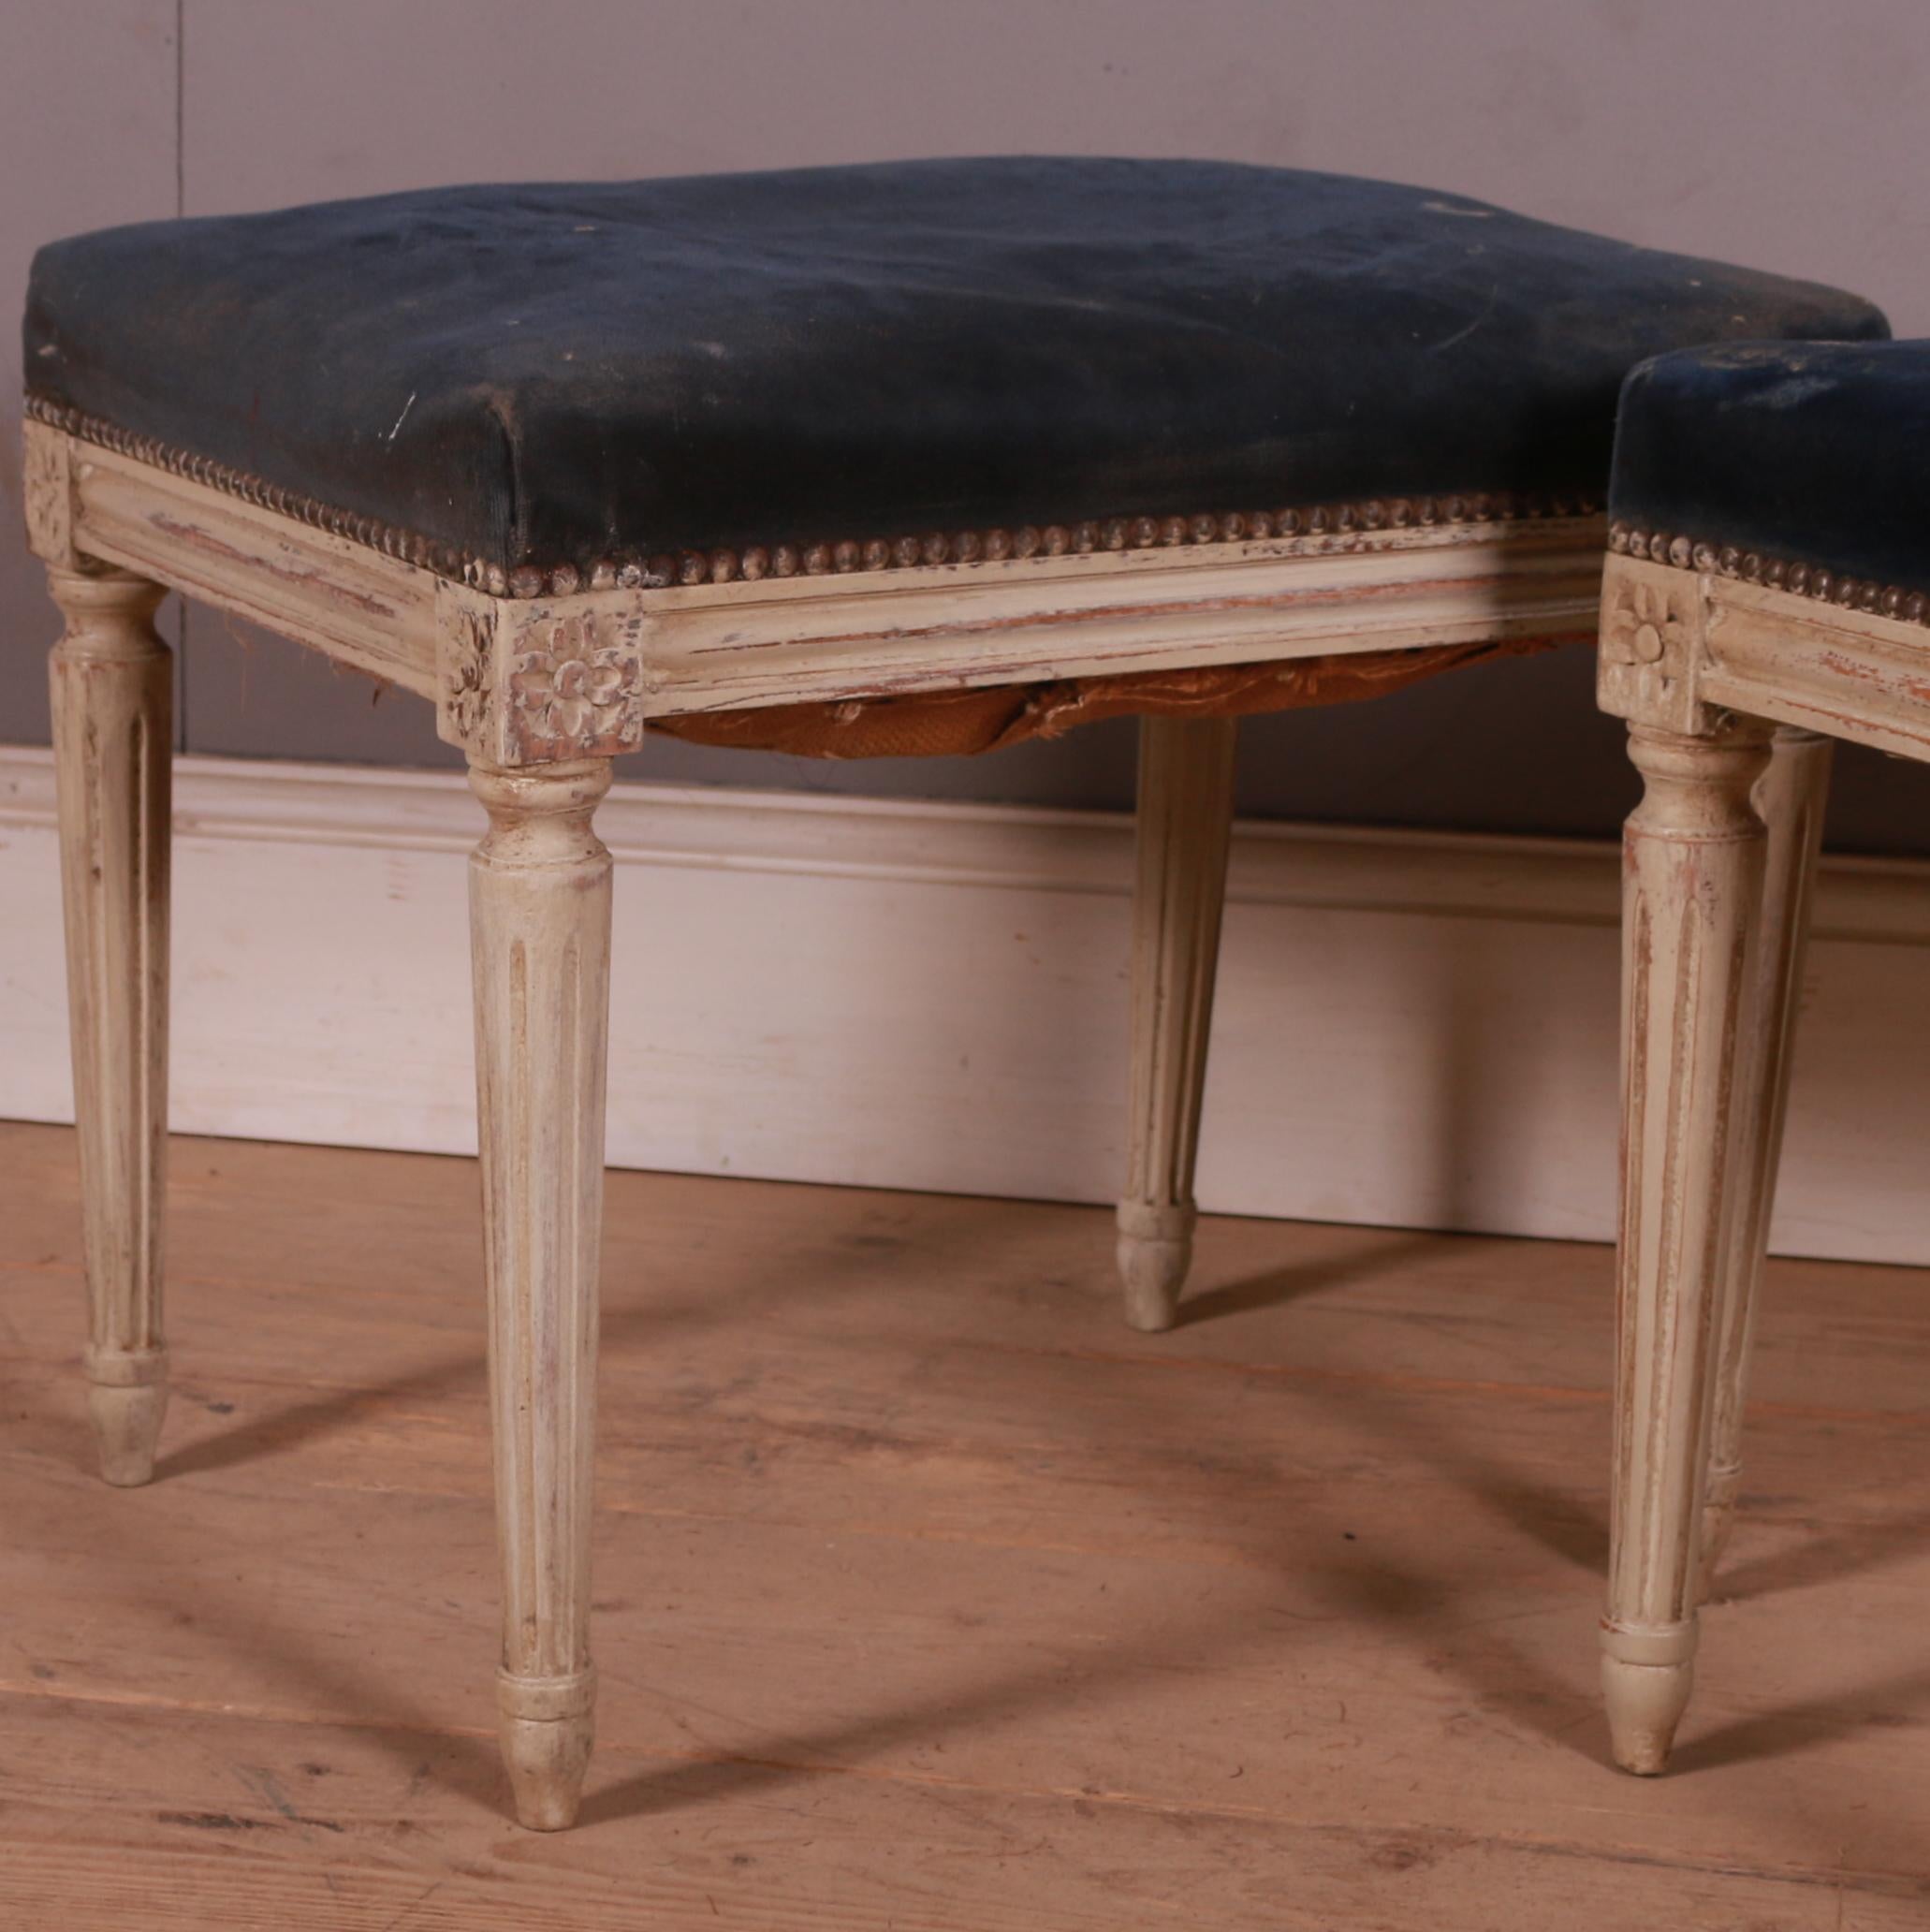 Pair of 19th C painted Swedish stools with fluted tapered leg and floral decoration to the corners. 1890

These need to be recovered. I can remove the current fabric if needed.

Dimensions
20 inches (51 cms) wide
16 inches (41 cms) deep
18